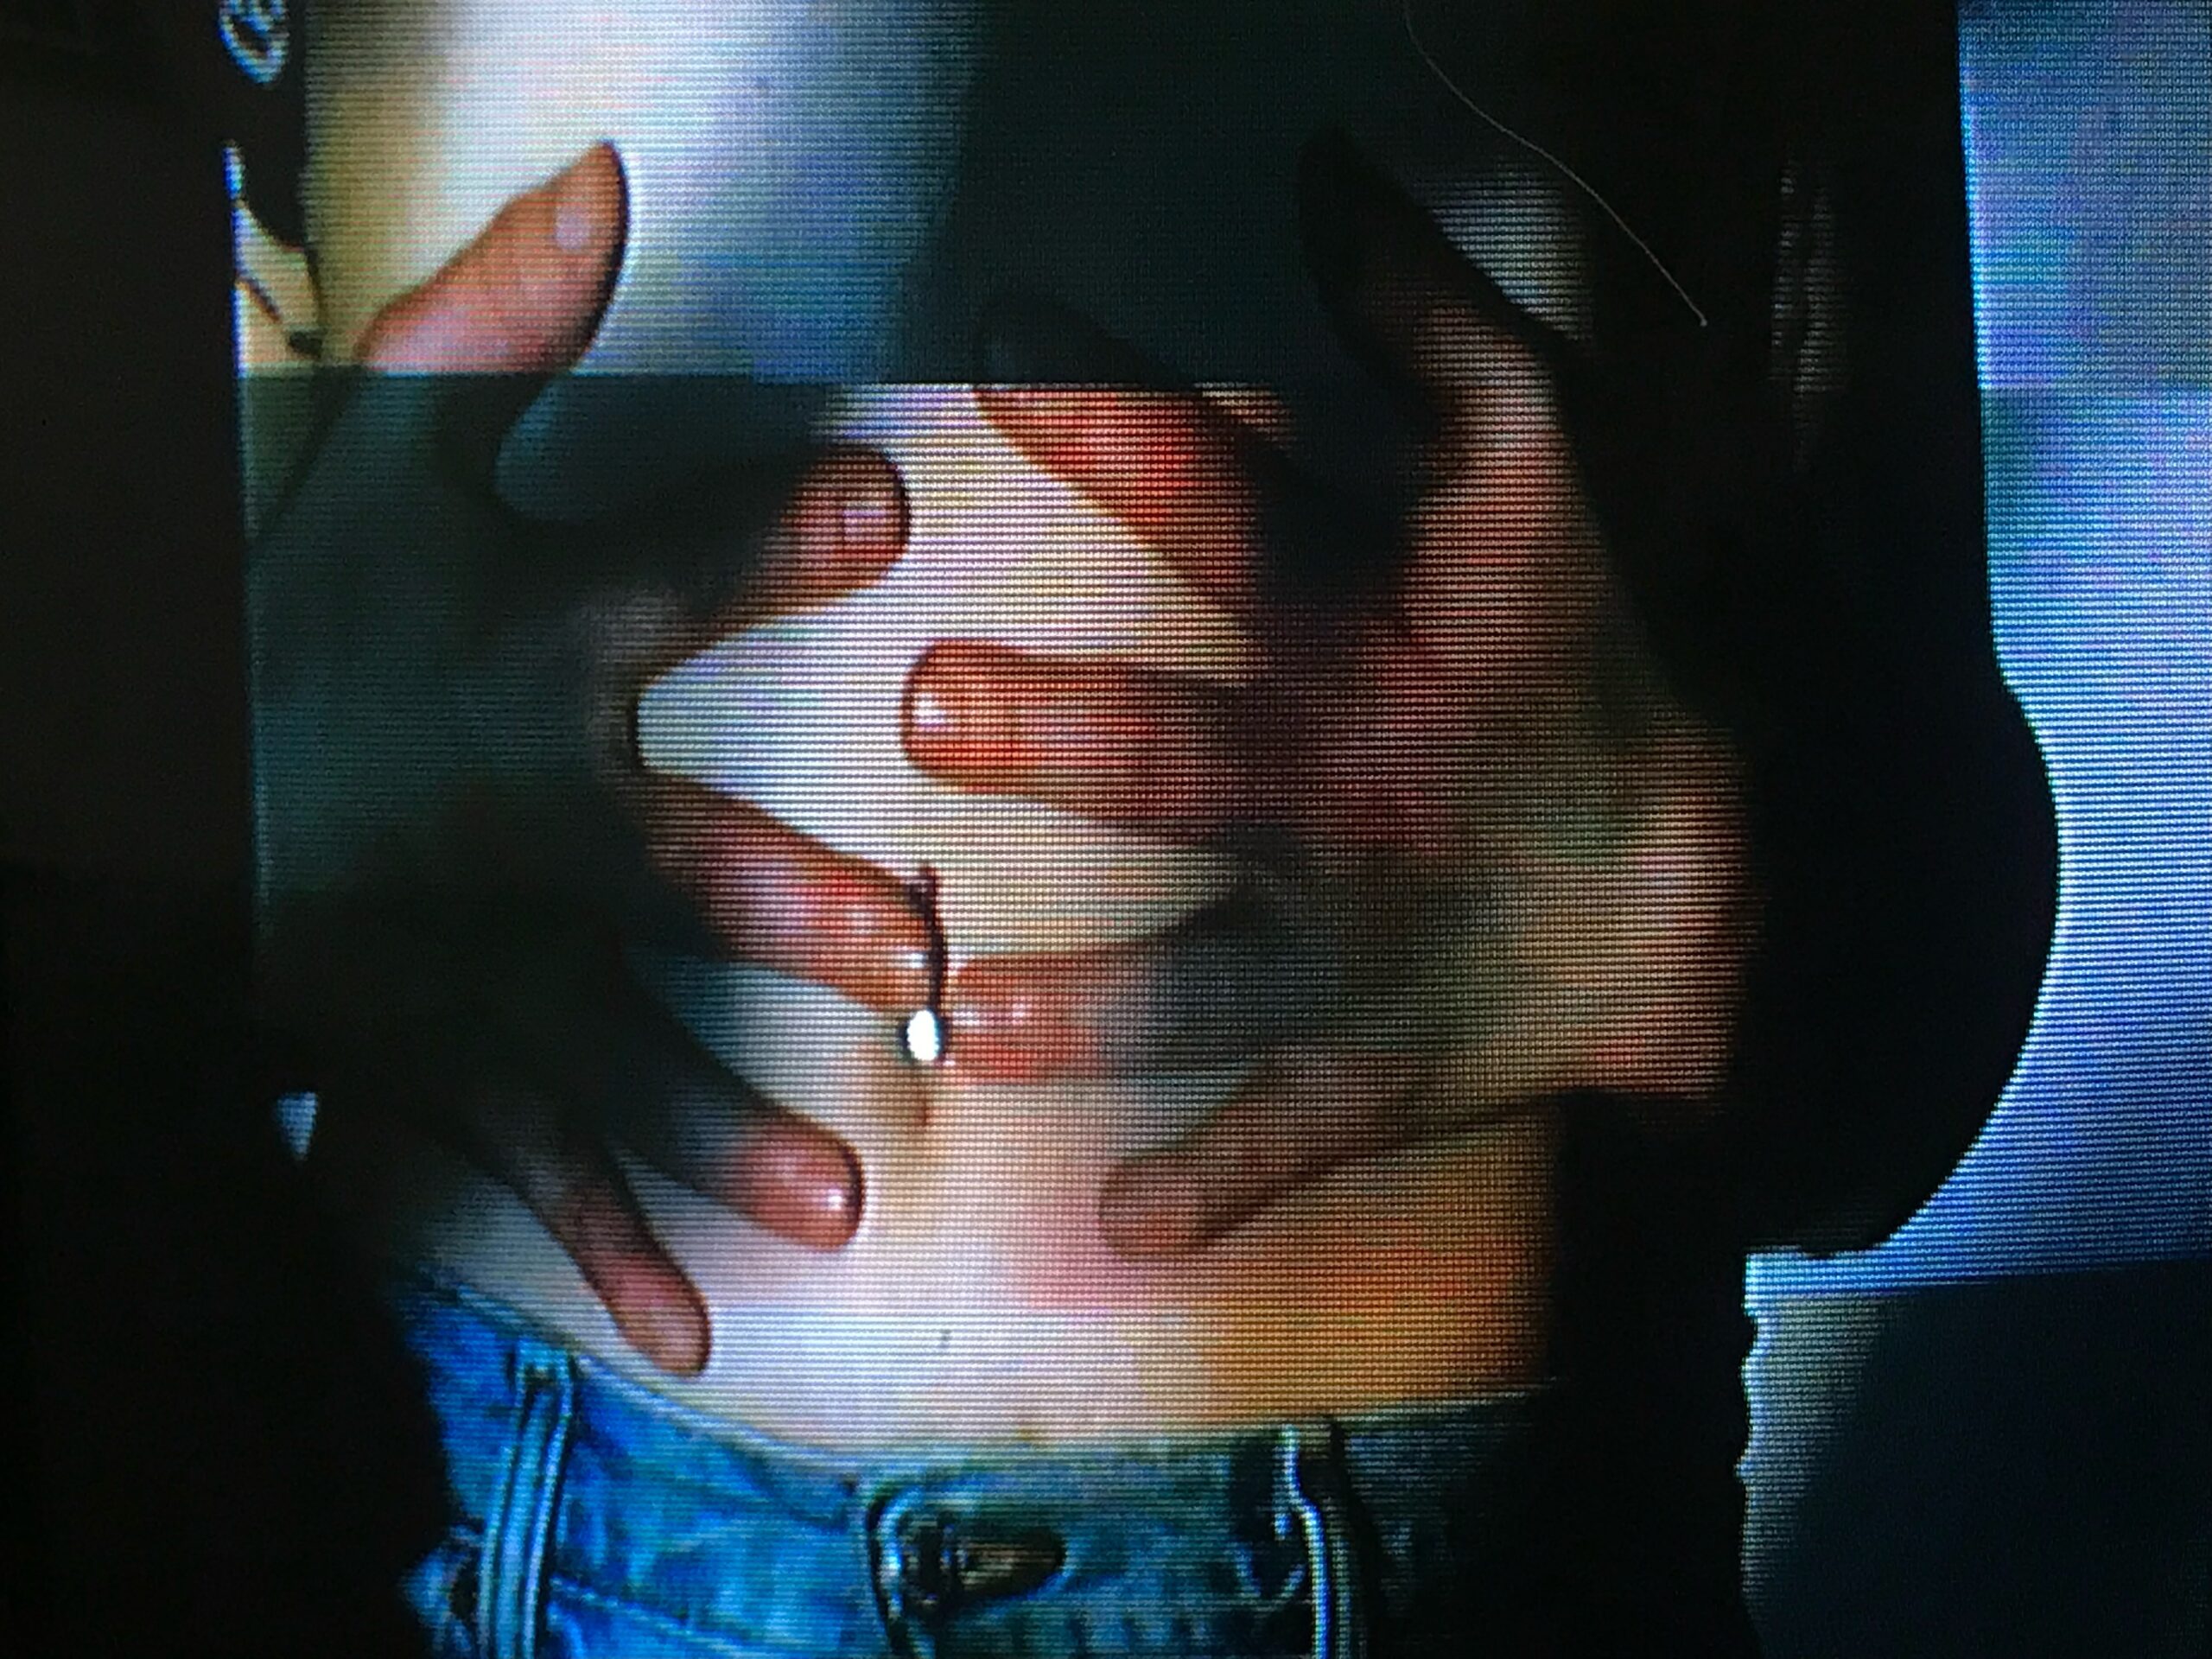 A projected image onto a white wall in a dark room. A pair of hands grab a stomach with bellybutton piercing. The subject is wearing blue jeans.